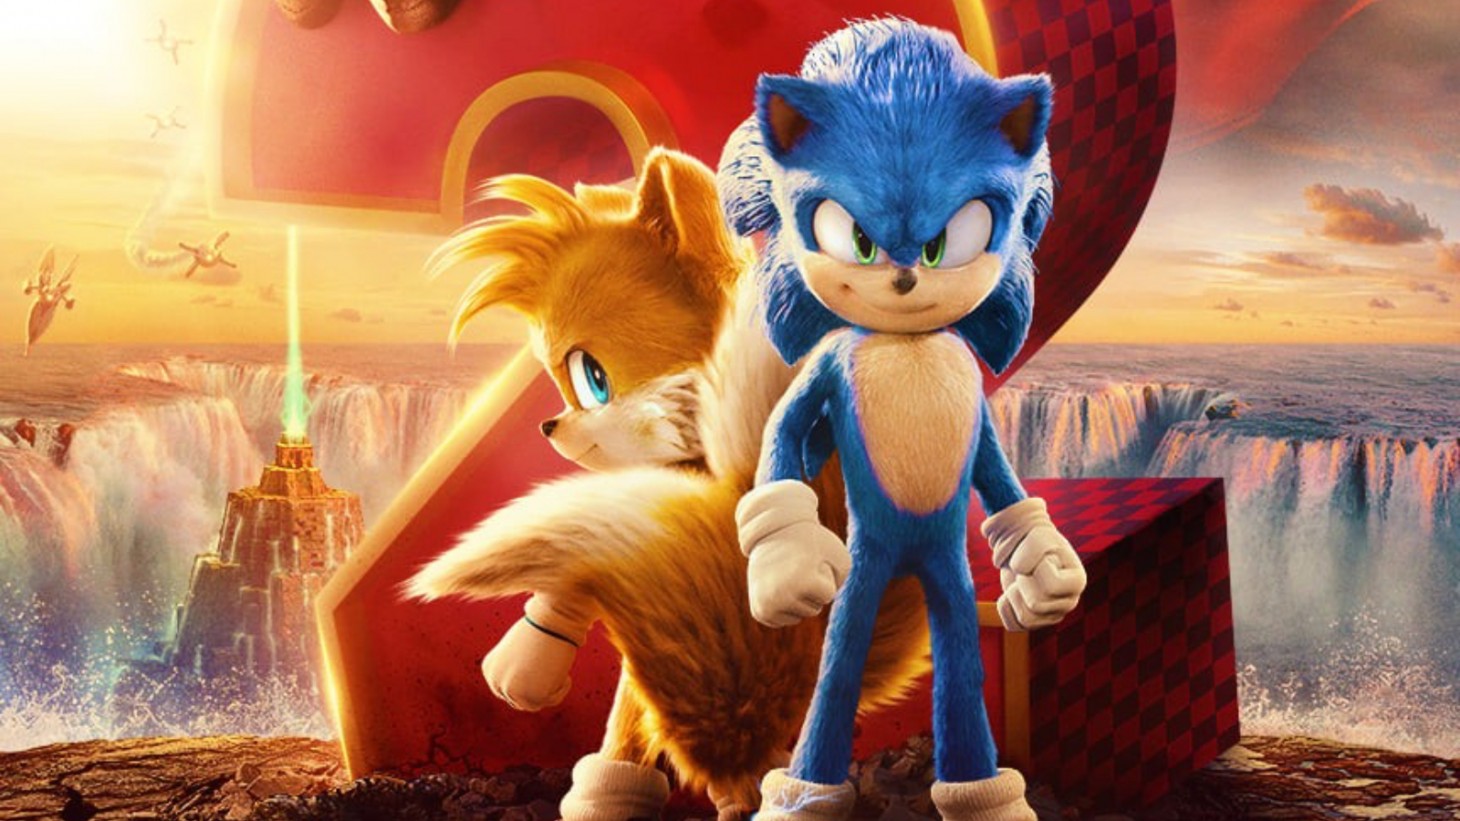 Sonic The Hedgehog 2 Is The Highest Grossing Video Game Movie Of All Time